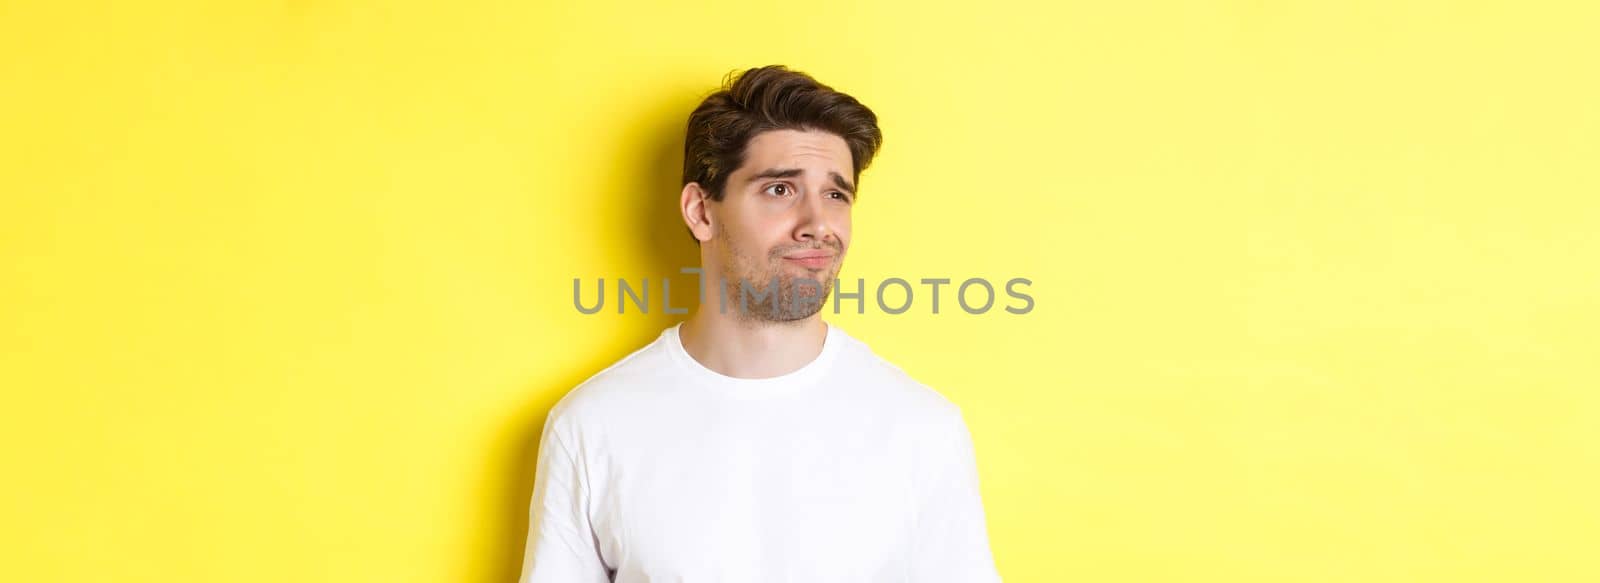 Reluctant guy in white t-shirt looking left, grimacing skeptical and displeased, standing over yellow background.